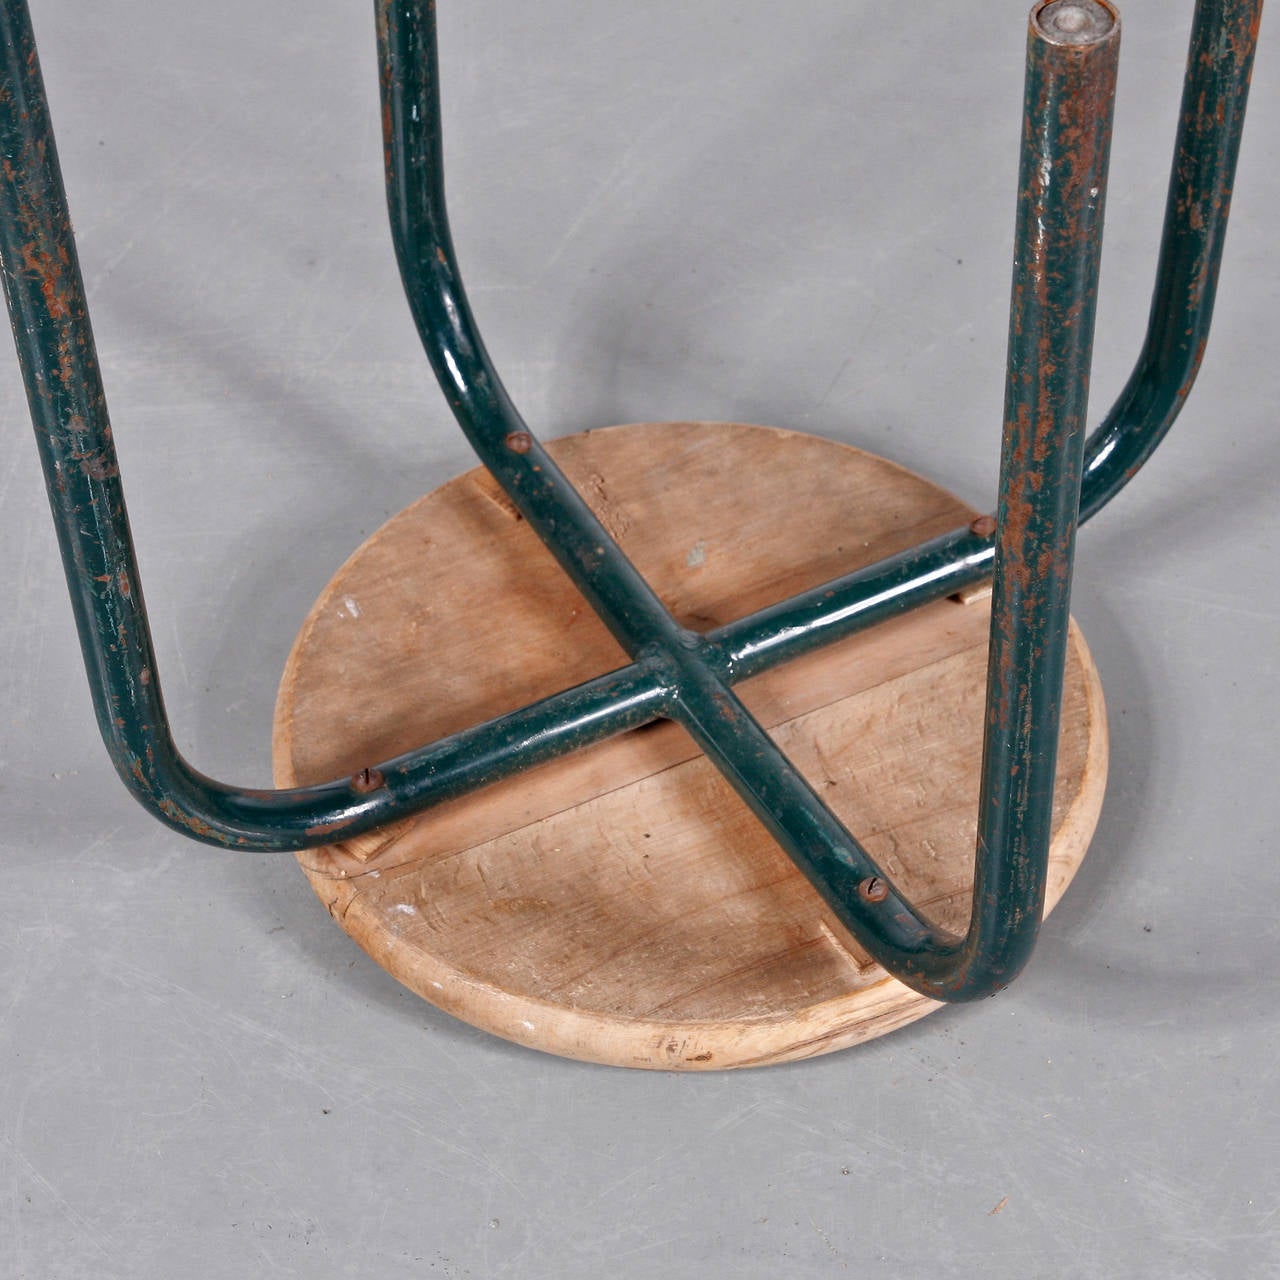 French Industrial Stool in the Manner of Jean Prouvé Stool, circa 1950